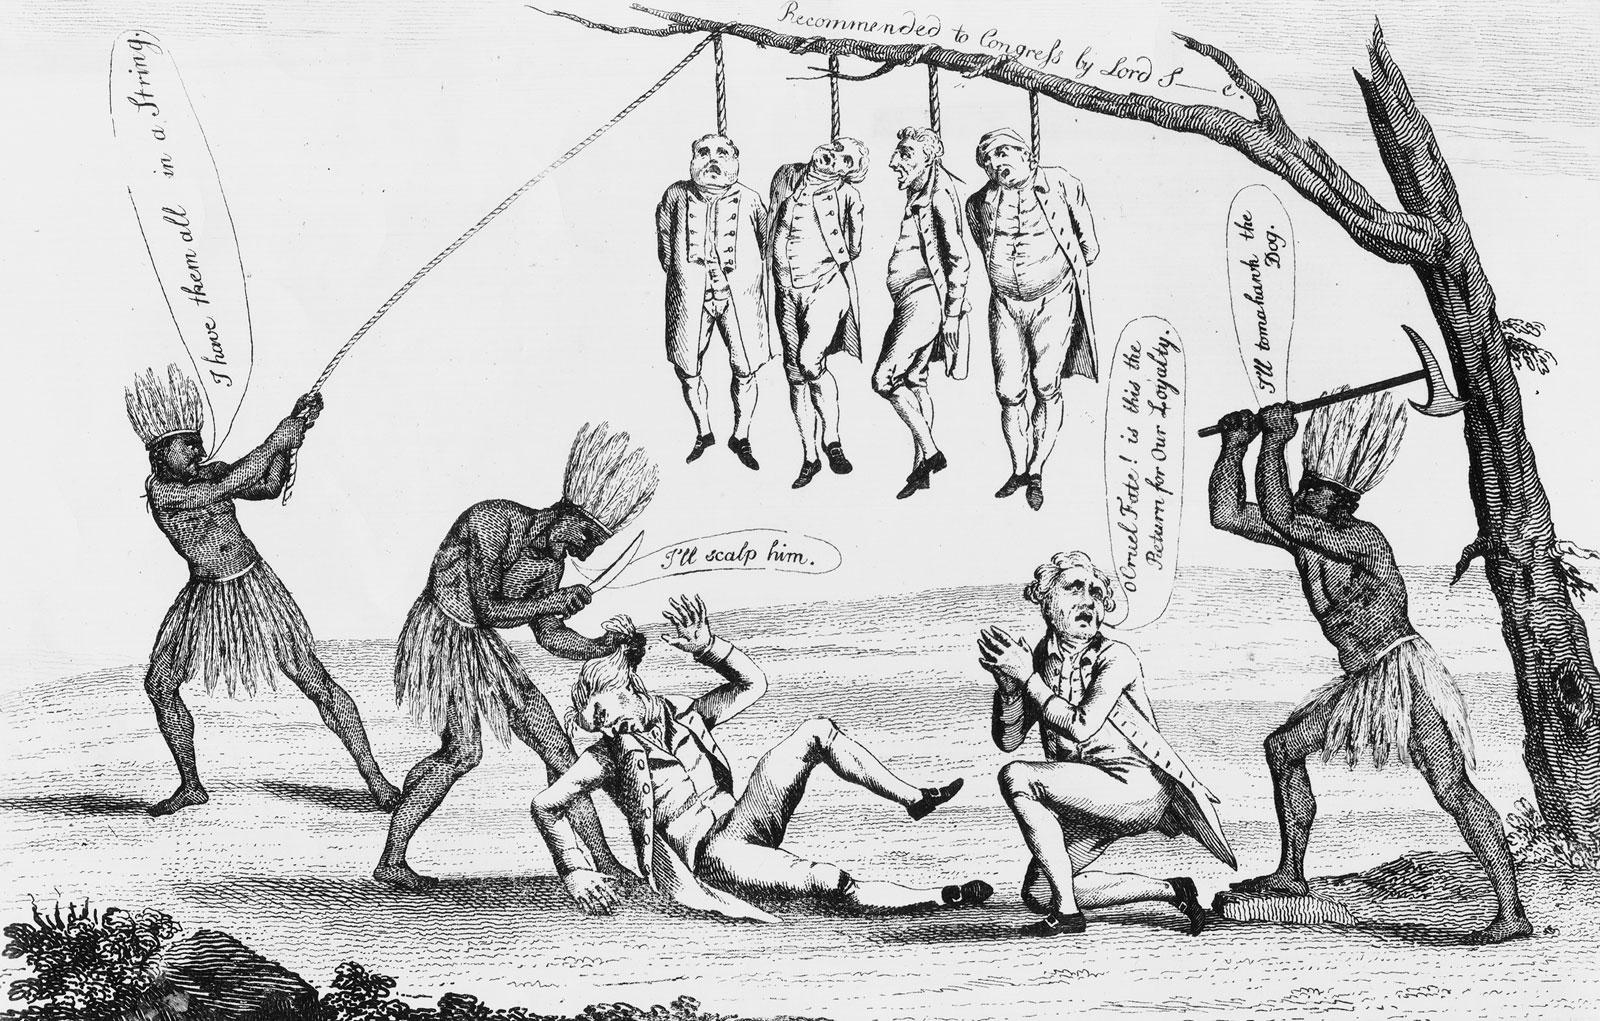 Etching showing atrocities against Loyalists. The Patriots are depicted as savages